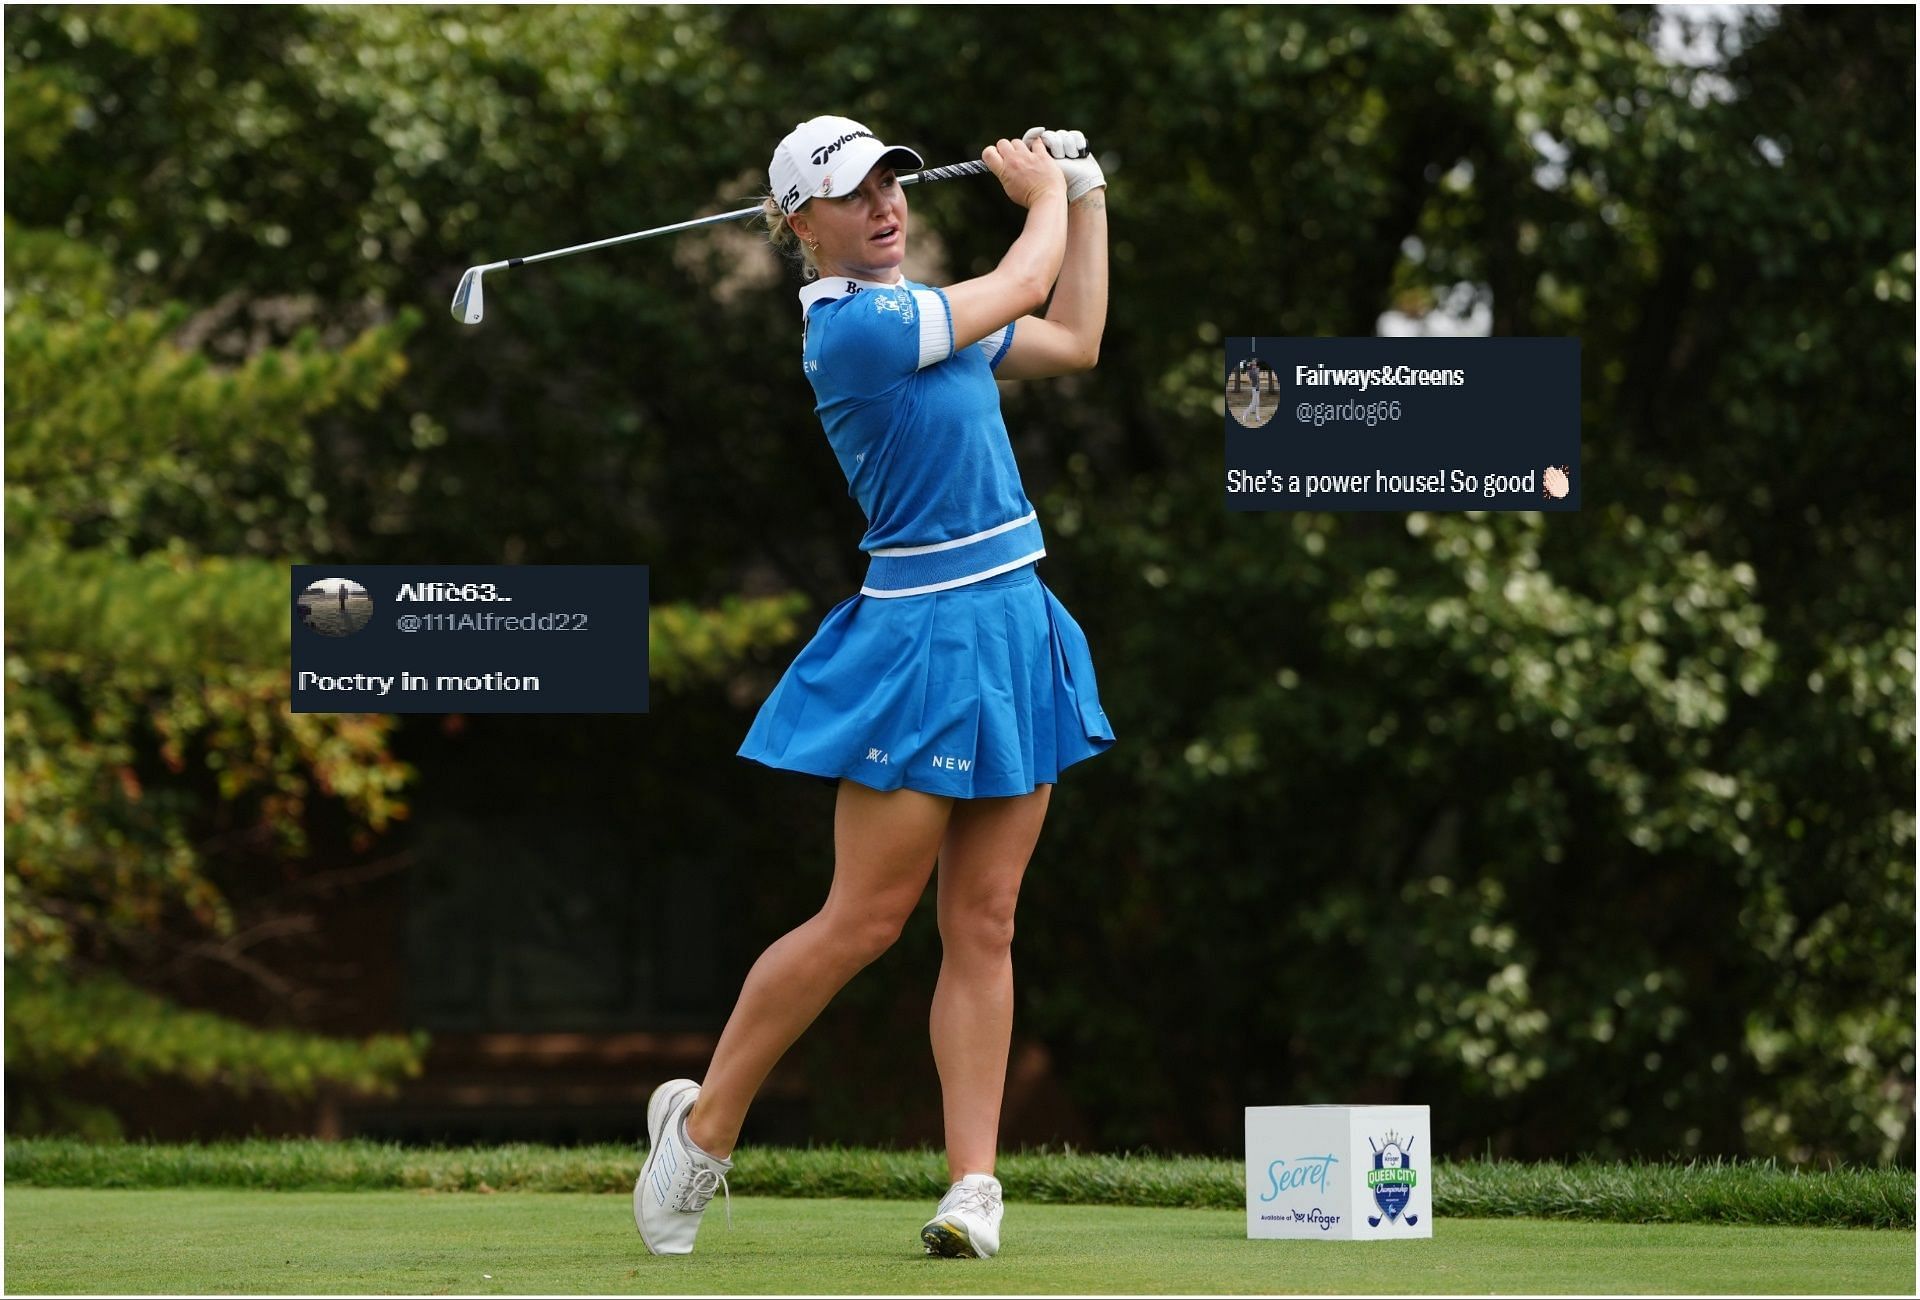 Poetry in motion” - Fans in awe of LPGA star Charley Hull's club twirls  after swing